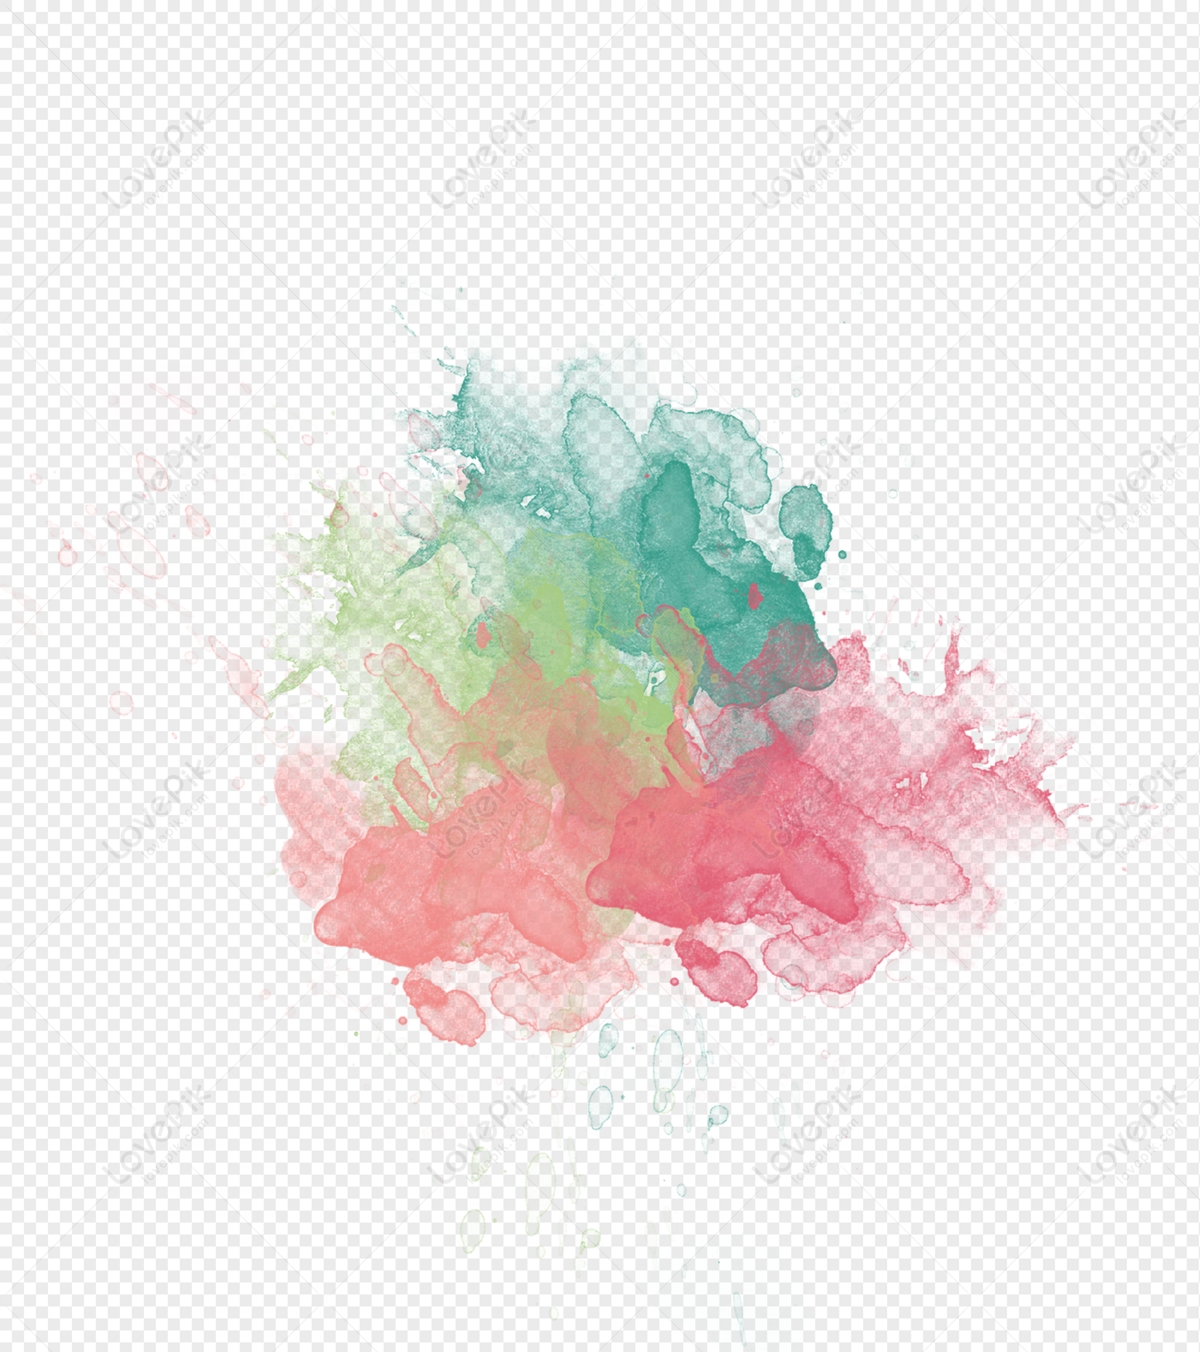 Color Effects PNG Transparent Images, PNG All